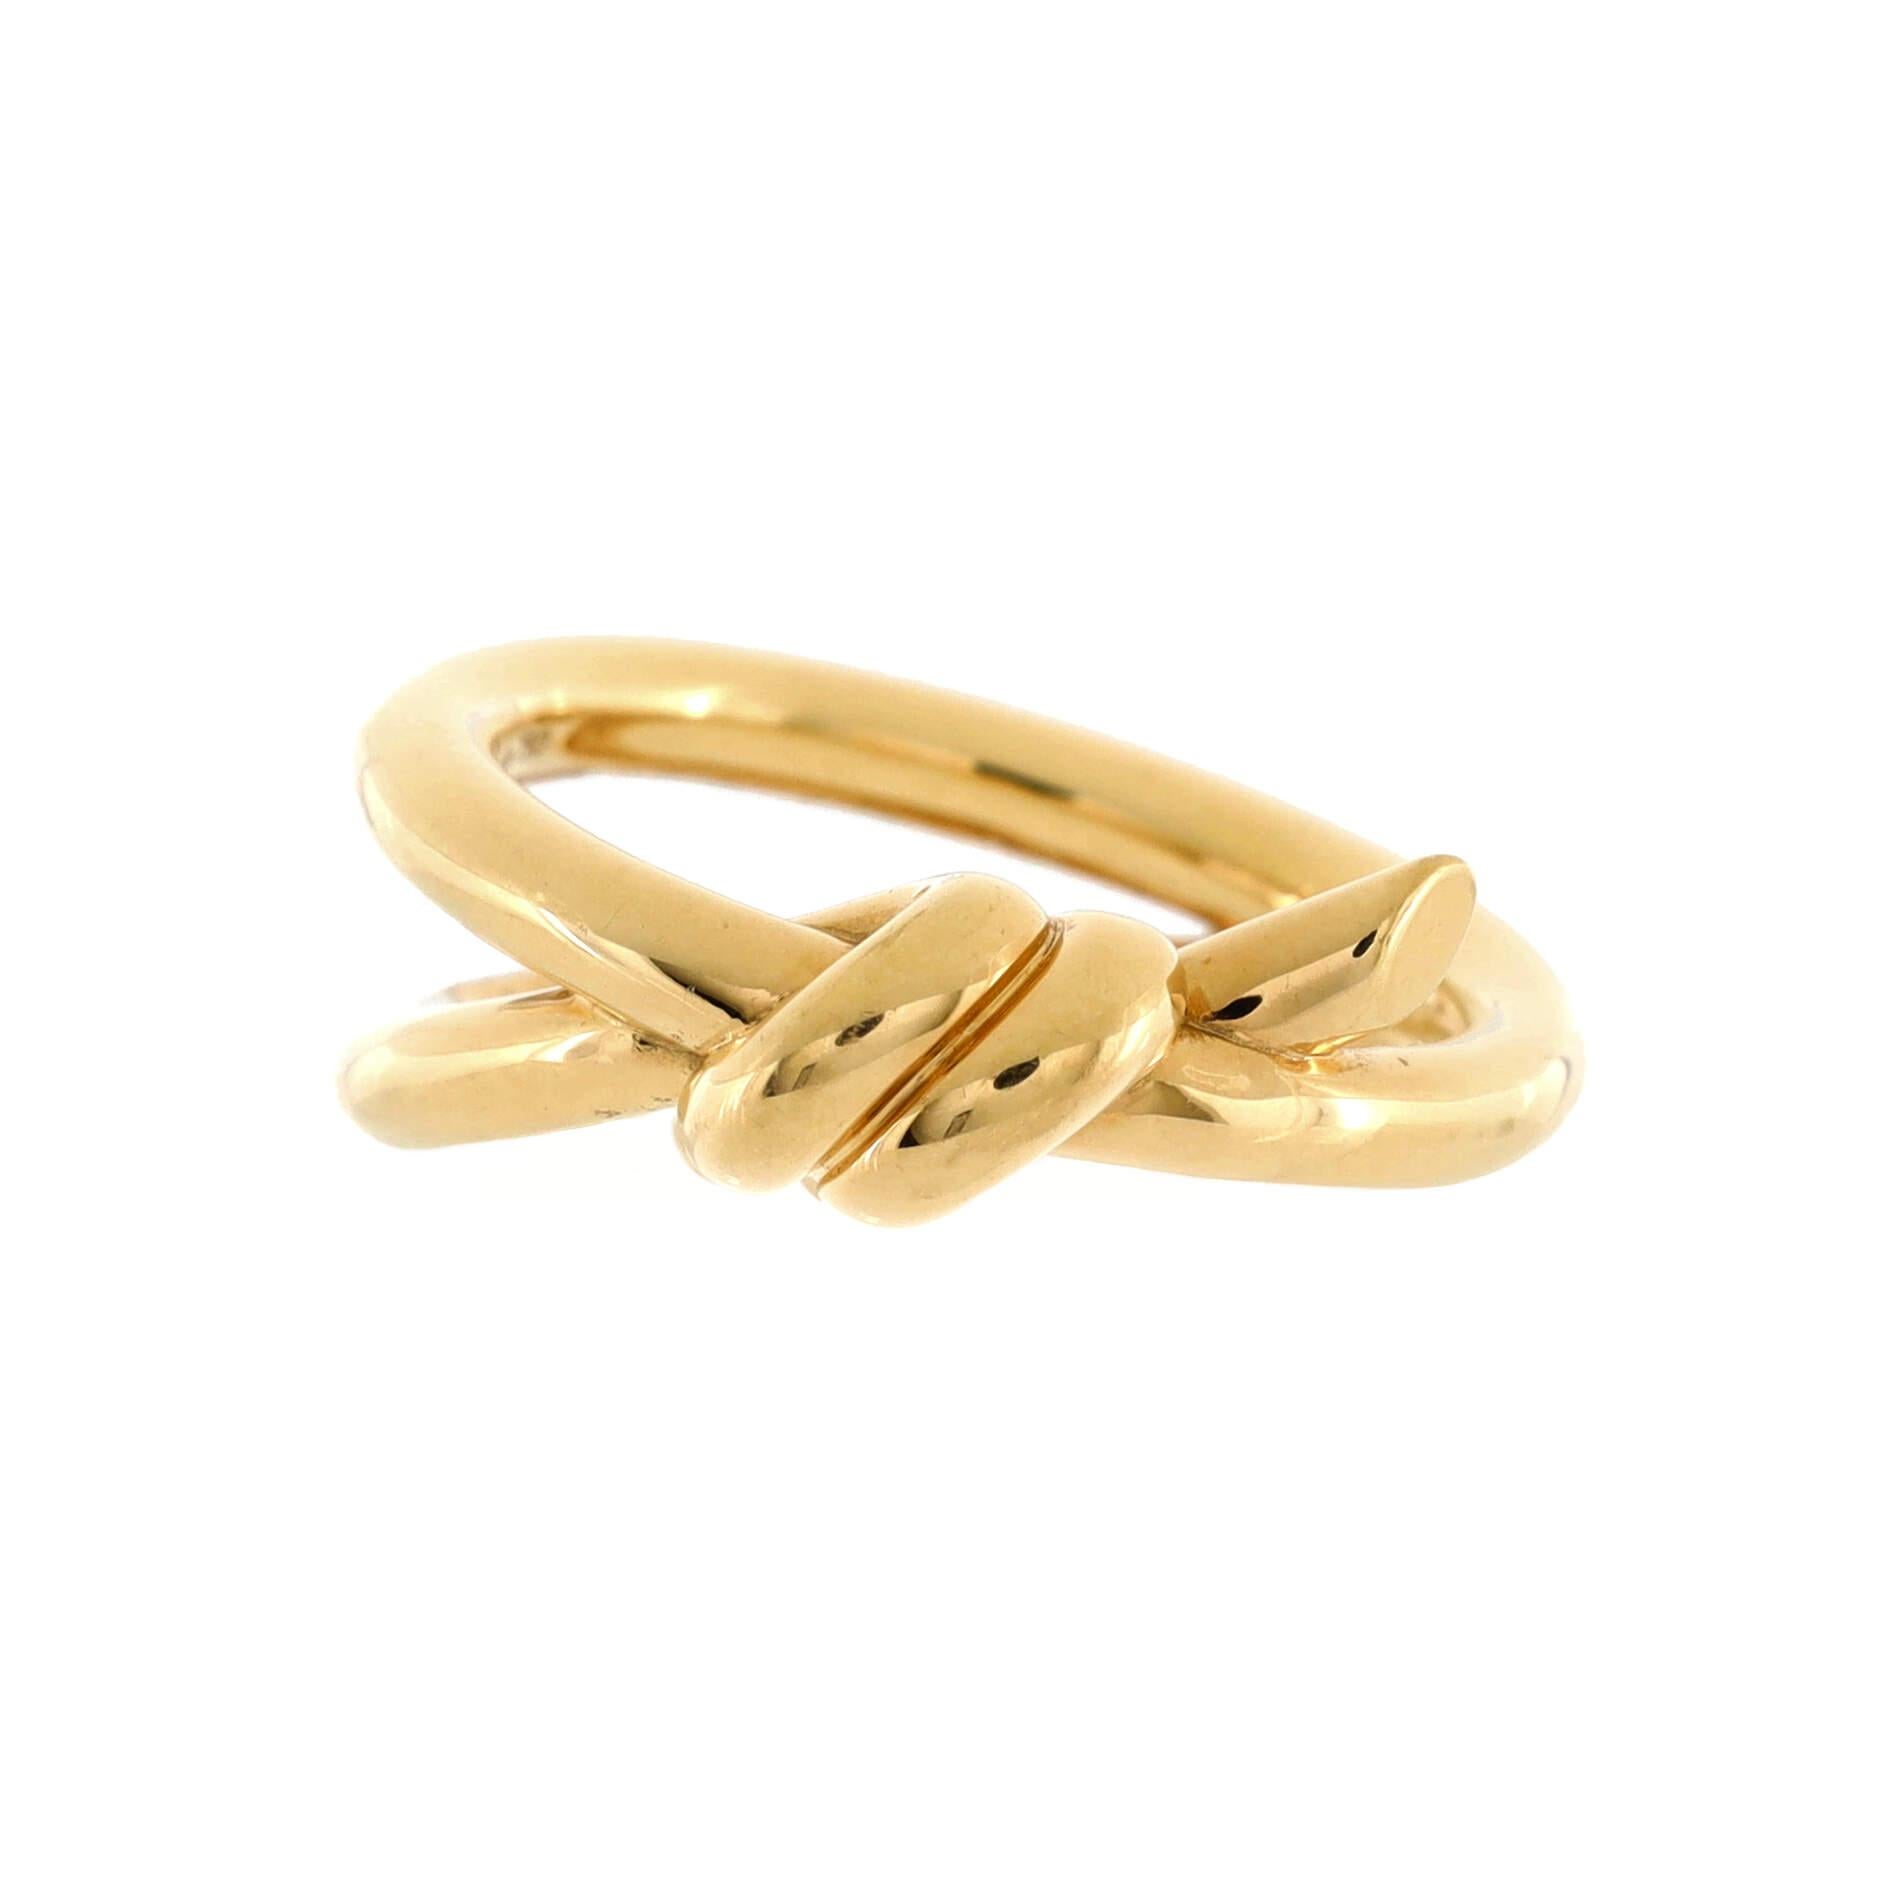 Condition: Great. Minor wear throughout.
Accessories: No Accessories
Measurements: Size: 7.5, Width: 9.00 mm
Designer: Tiffany & Co.
Model: Double Row Knot Ring 18K Yellow Gold
Exterior Color: Yellow Gold
Item Number: 208906/2